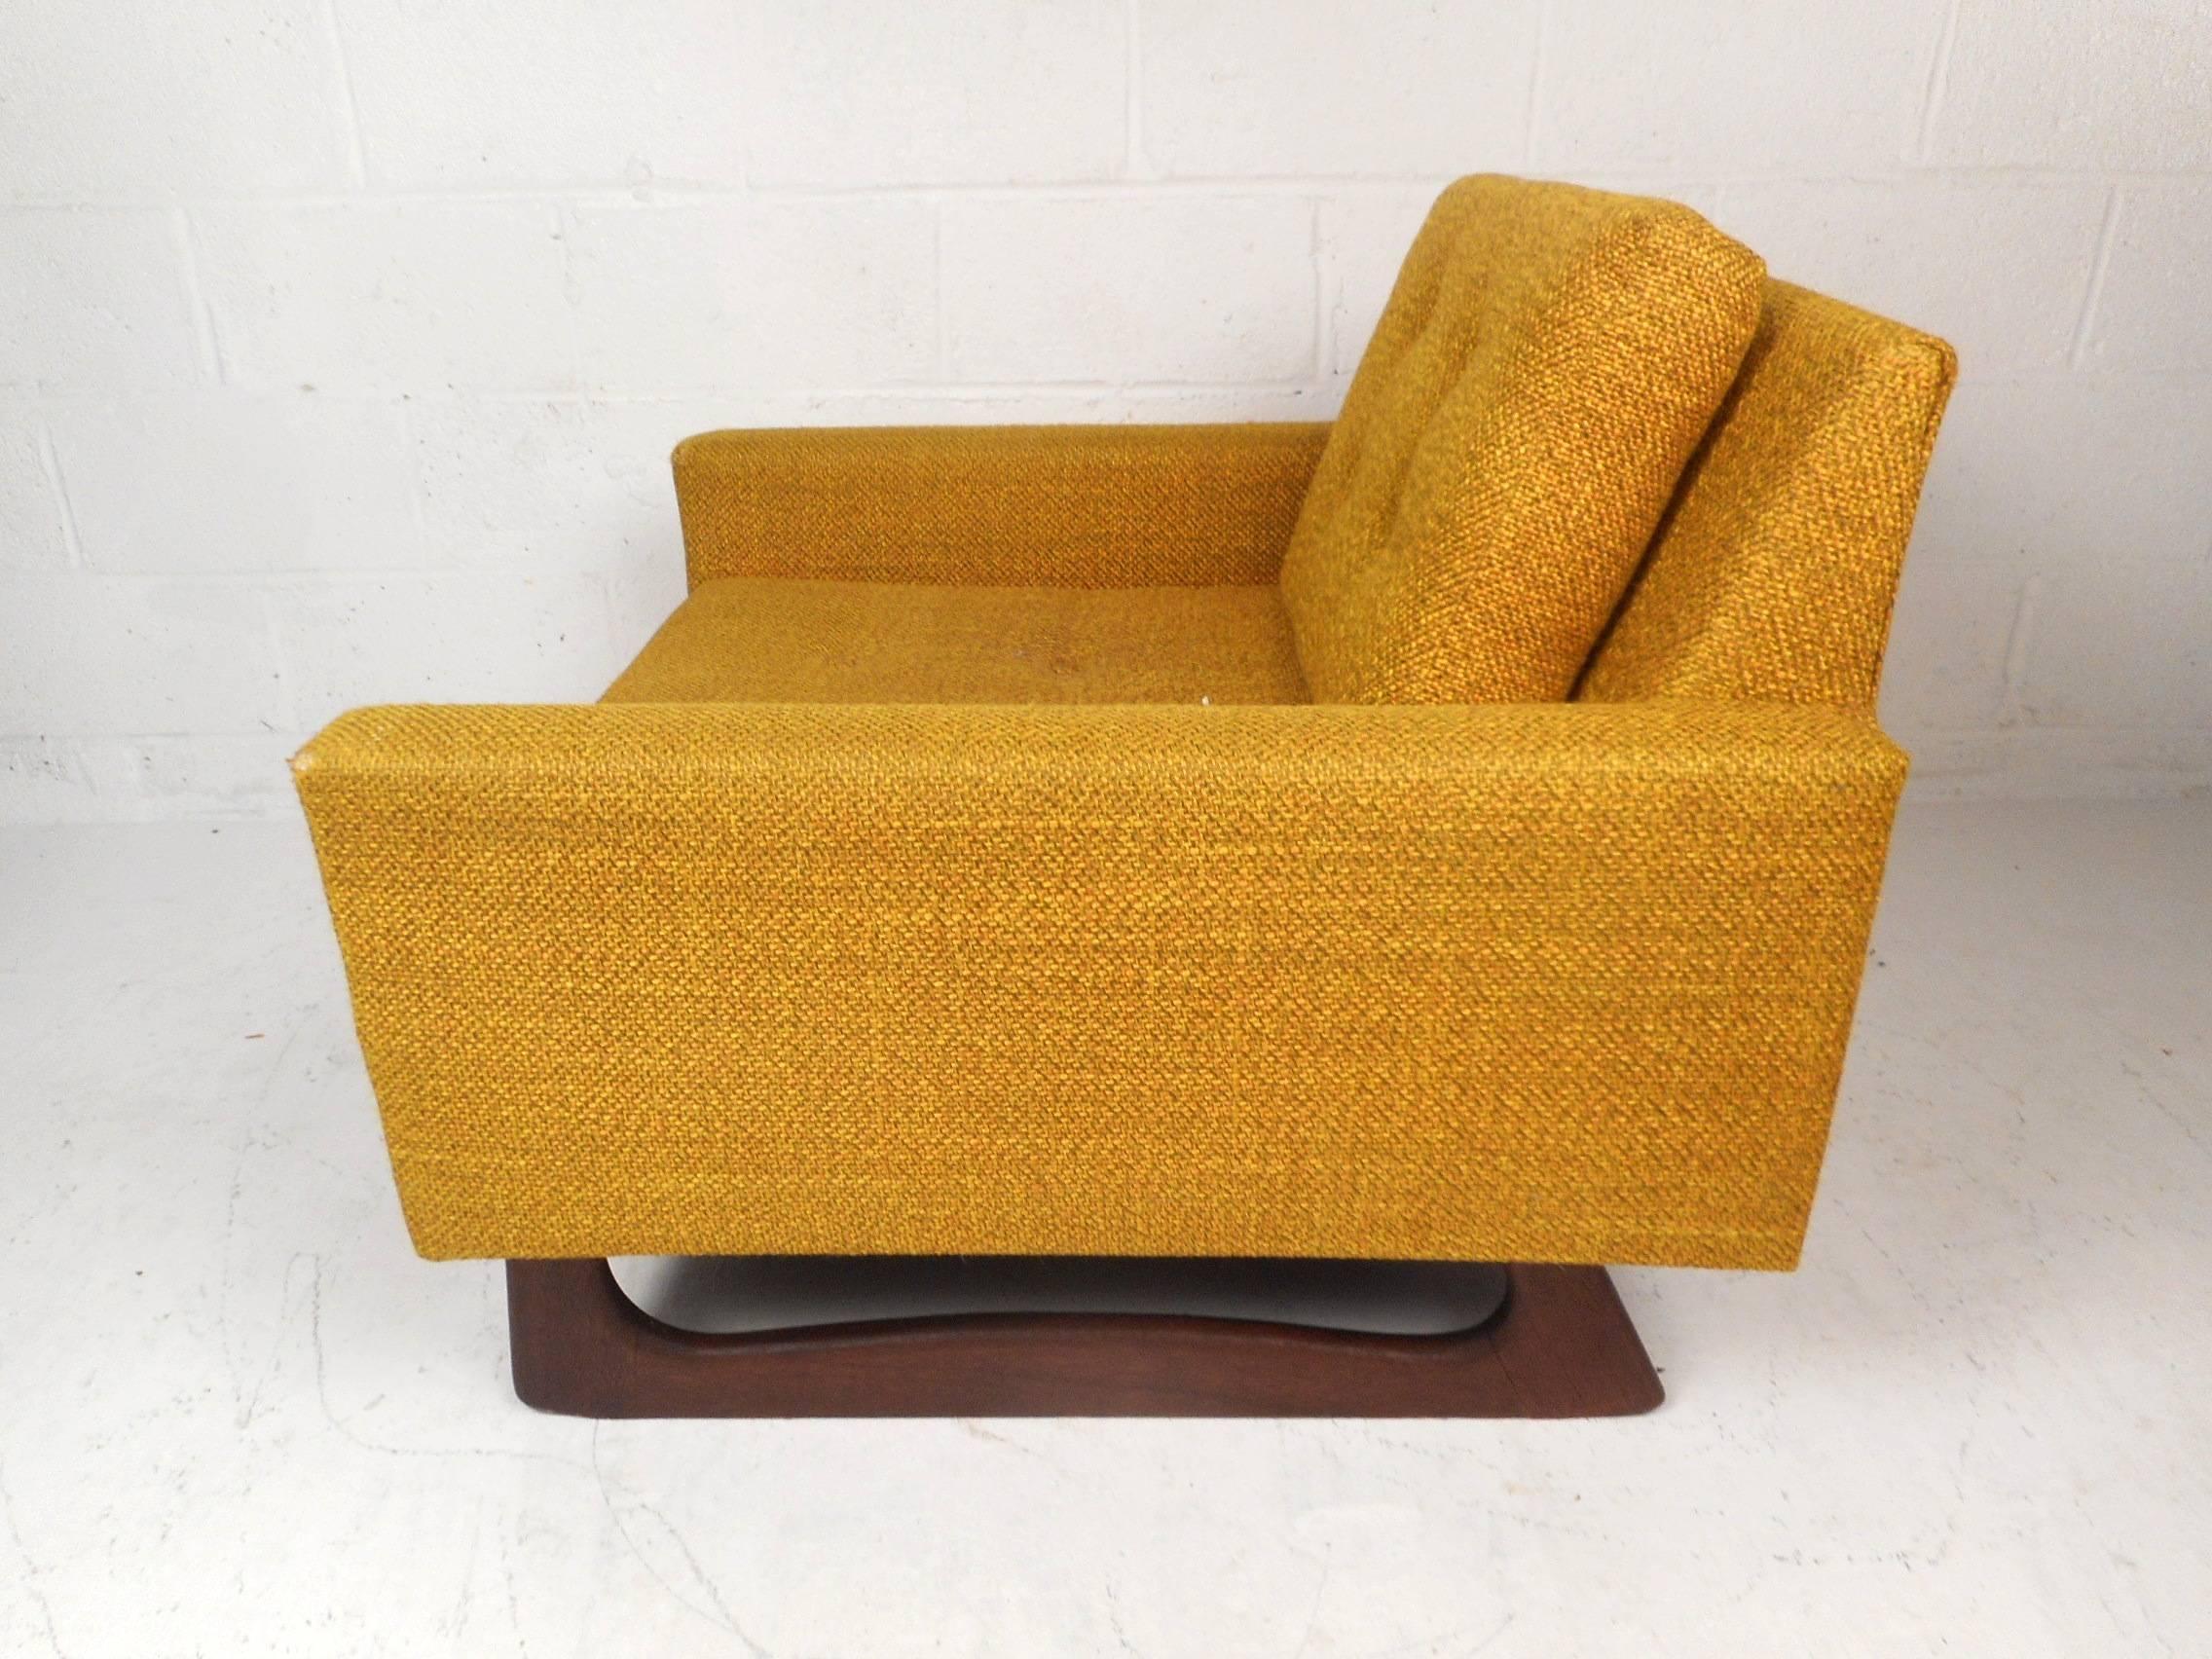 This beautiful vintage modern lounge chair features plush yellow upholstery and a sculpted walnut sled base. Sleek design with overstuffed removable cushions and a tufted fabric adding to the midcentury appeal. The wide seating and low arm rests